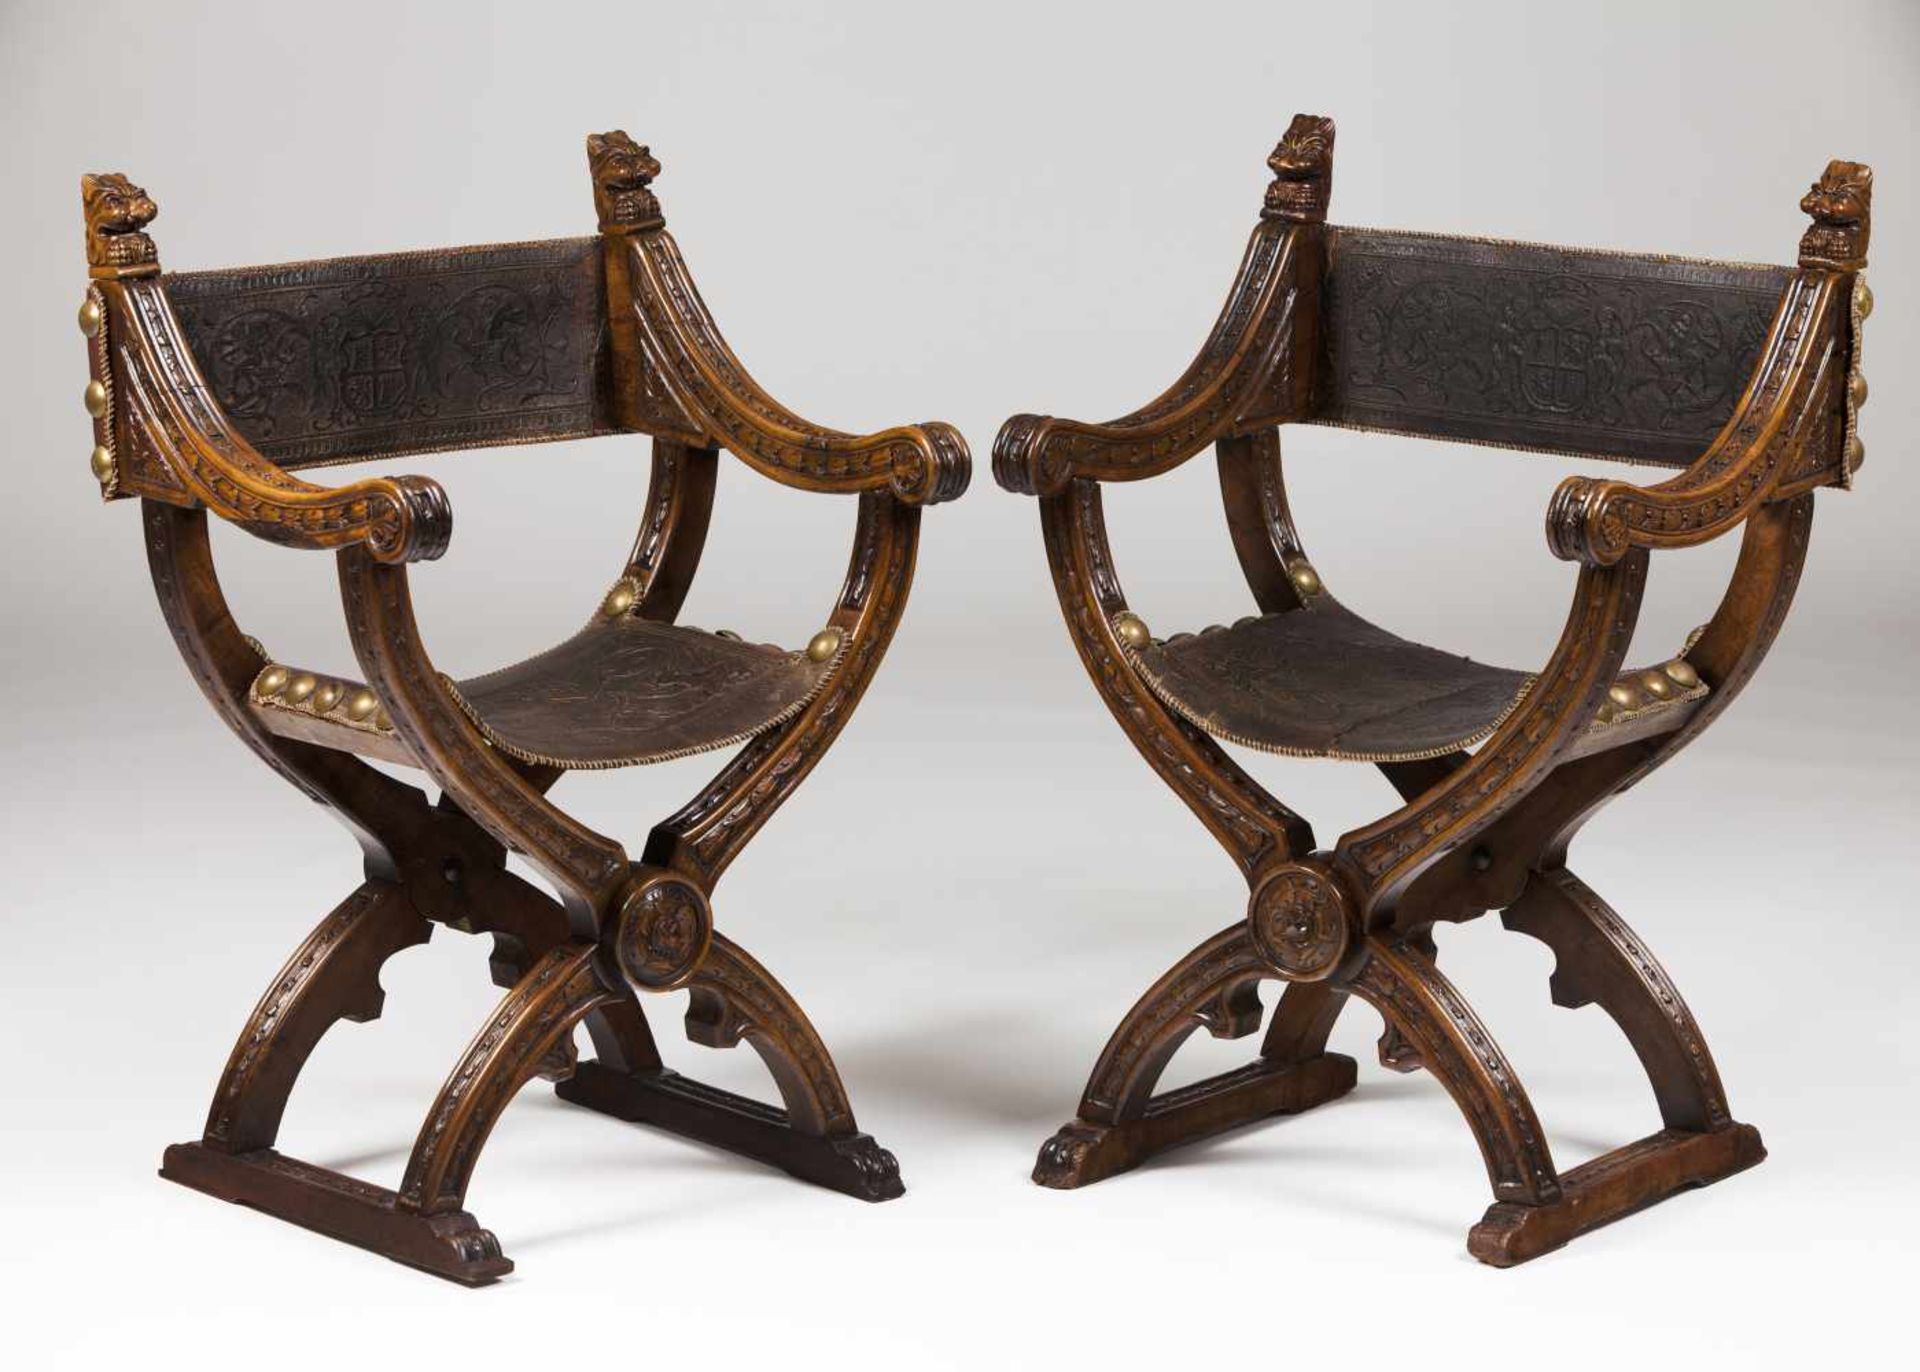 A pair of Savonarola chairsWalnutCarved floral and foliage motifs and classical mask decora